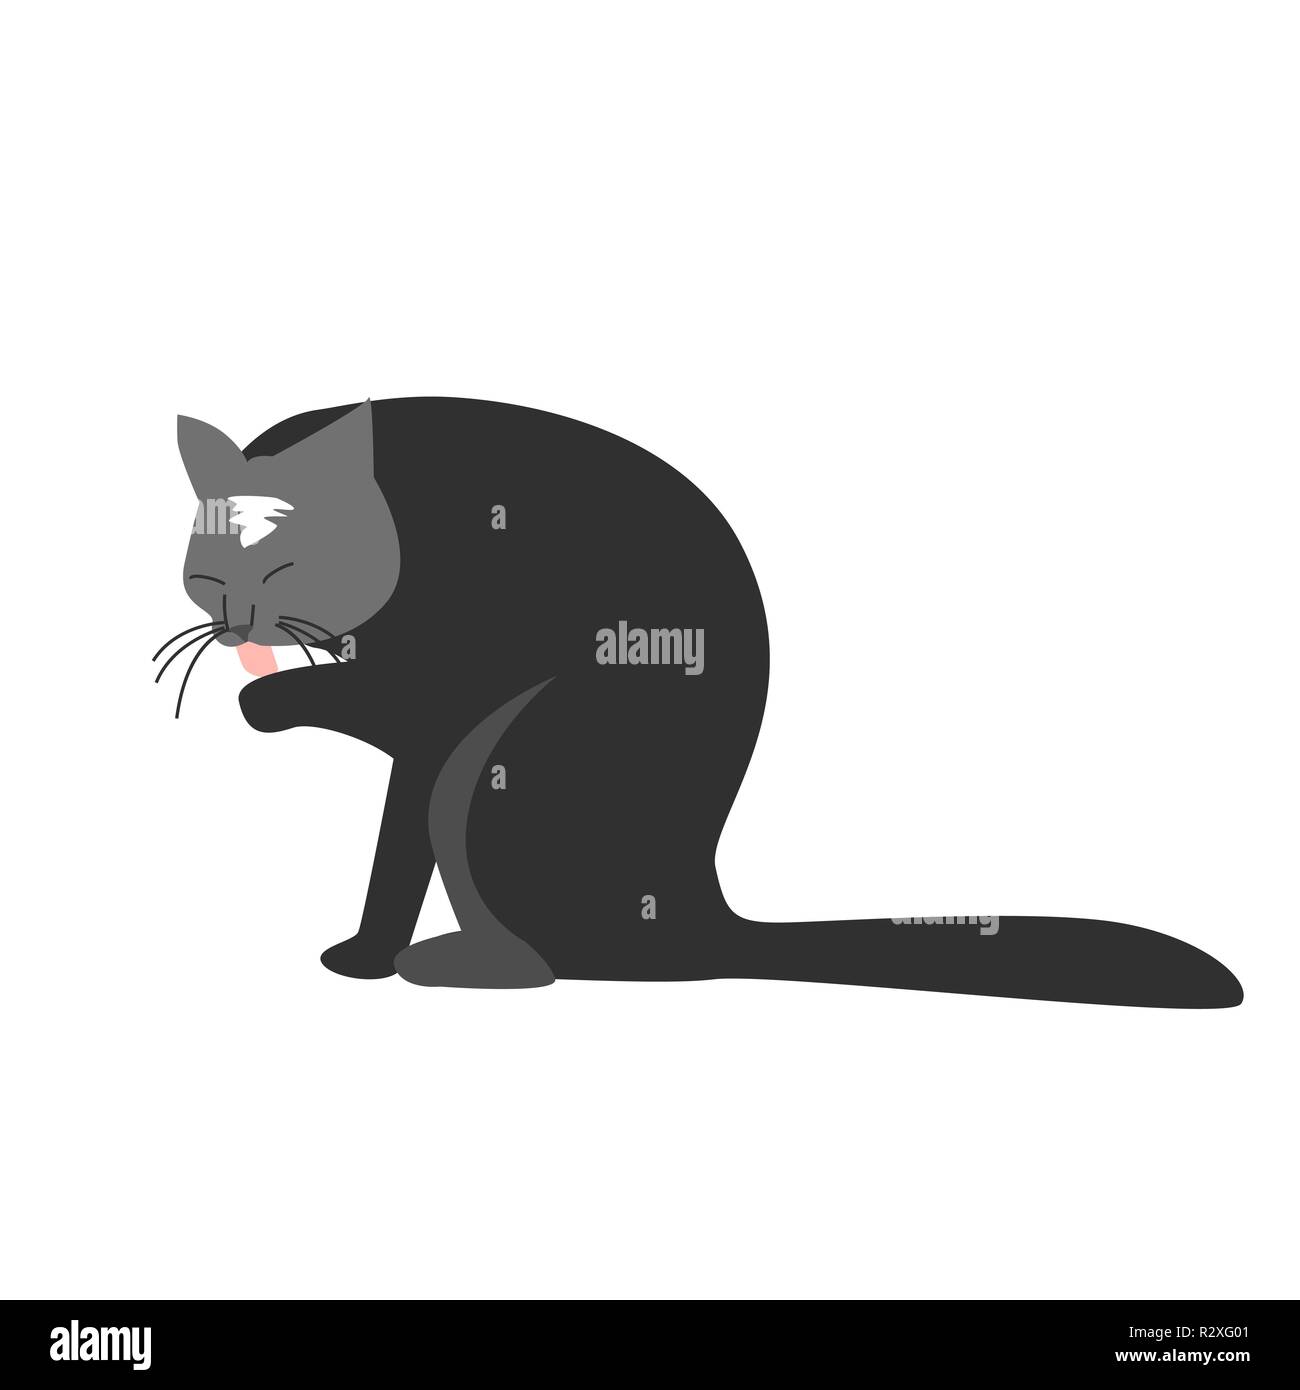 Funny hand drawn black cat is licking its paw. Vector illustration of a cartoon character Stock Vector